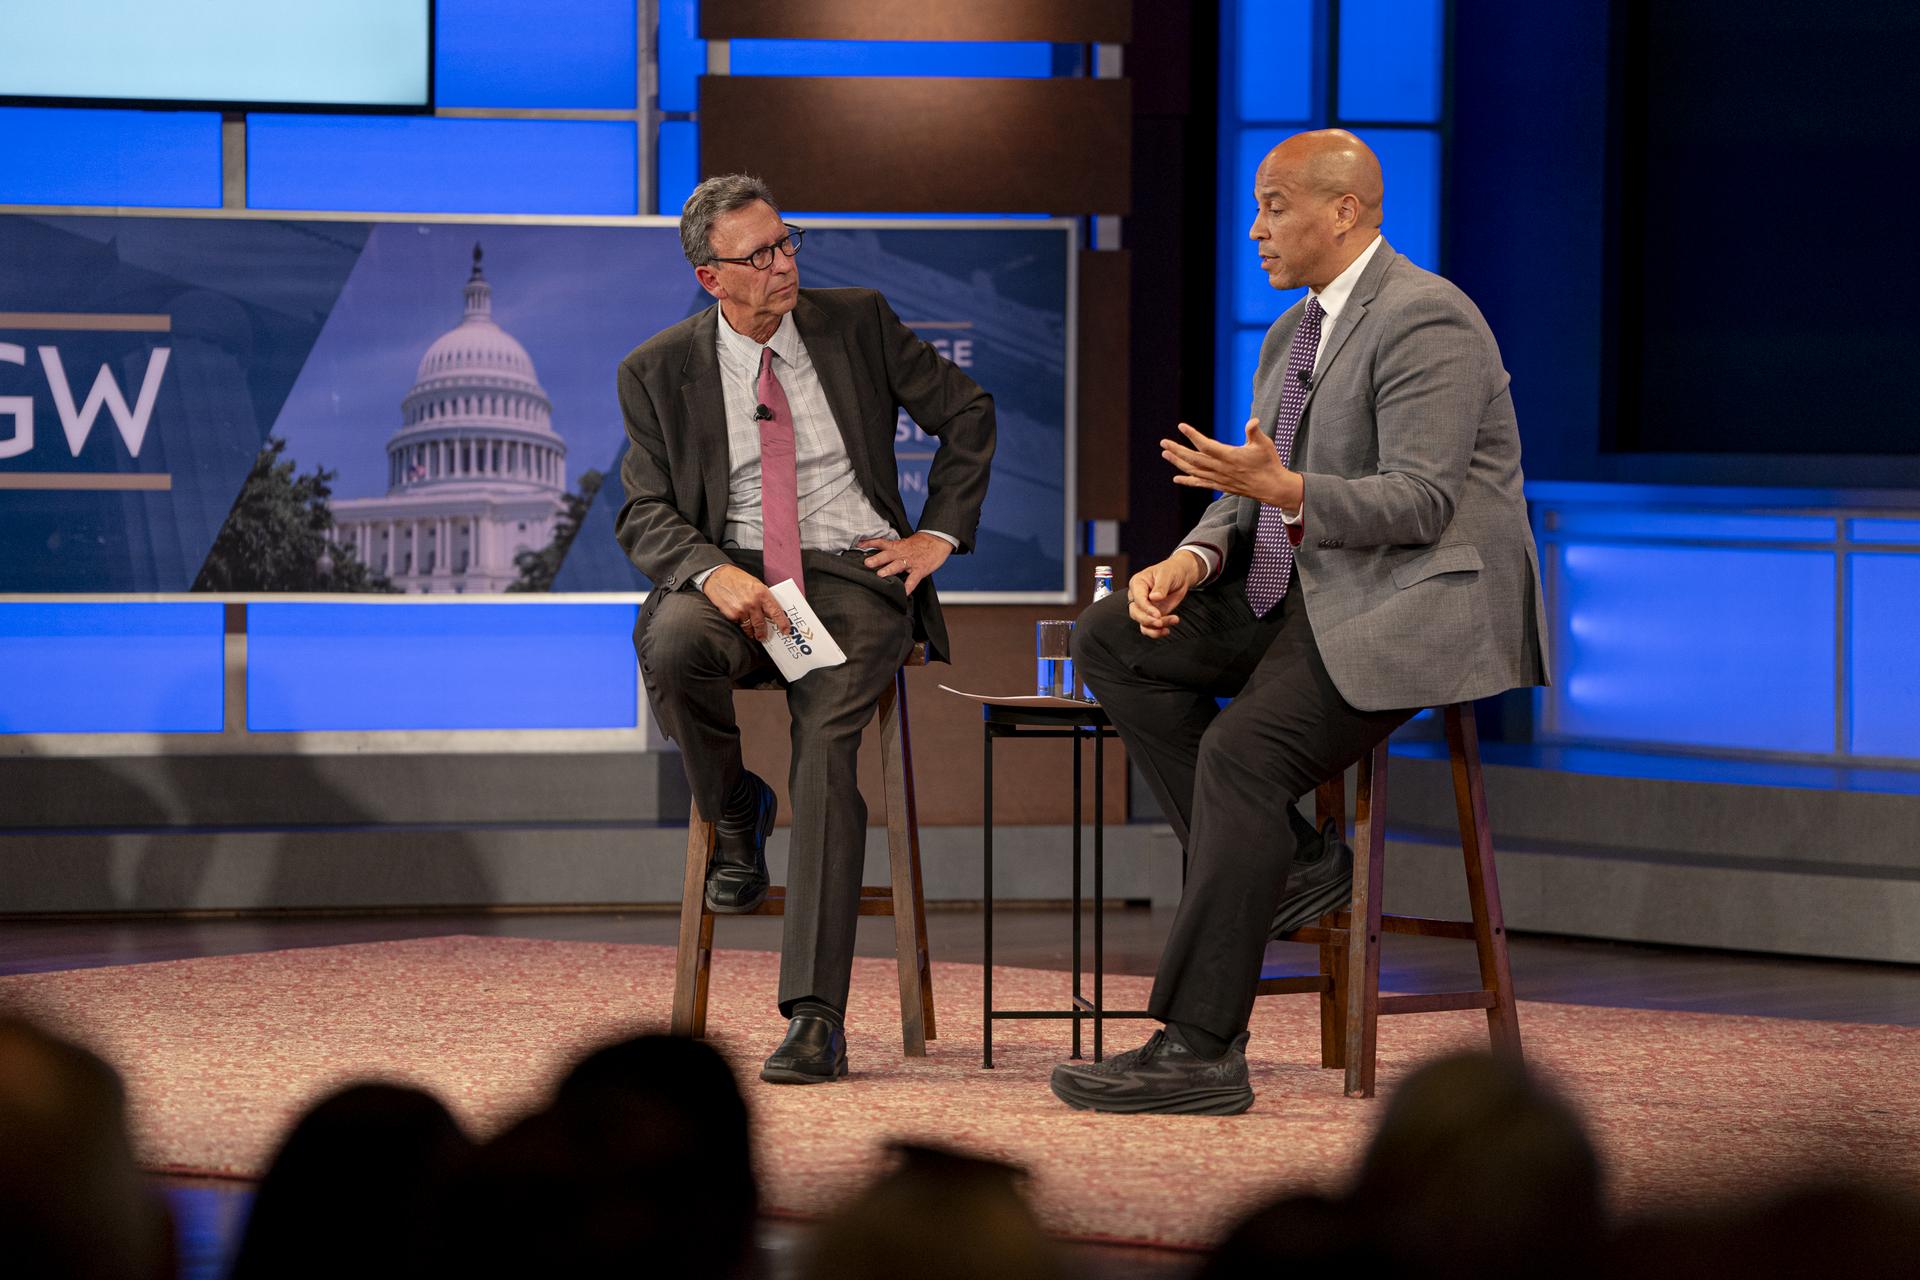 Sen. Cory Booker (D-N.J.) and GW’s Frank Sesno discussed how to heal the political divide in the United States at the inaugural event for The Sesno Series.